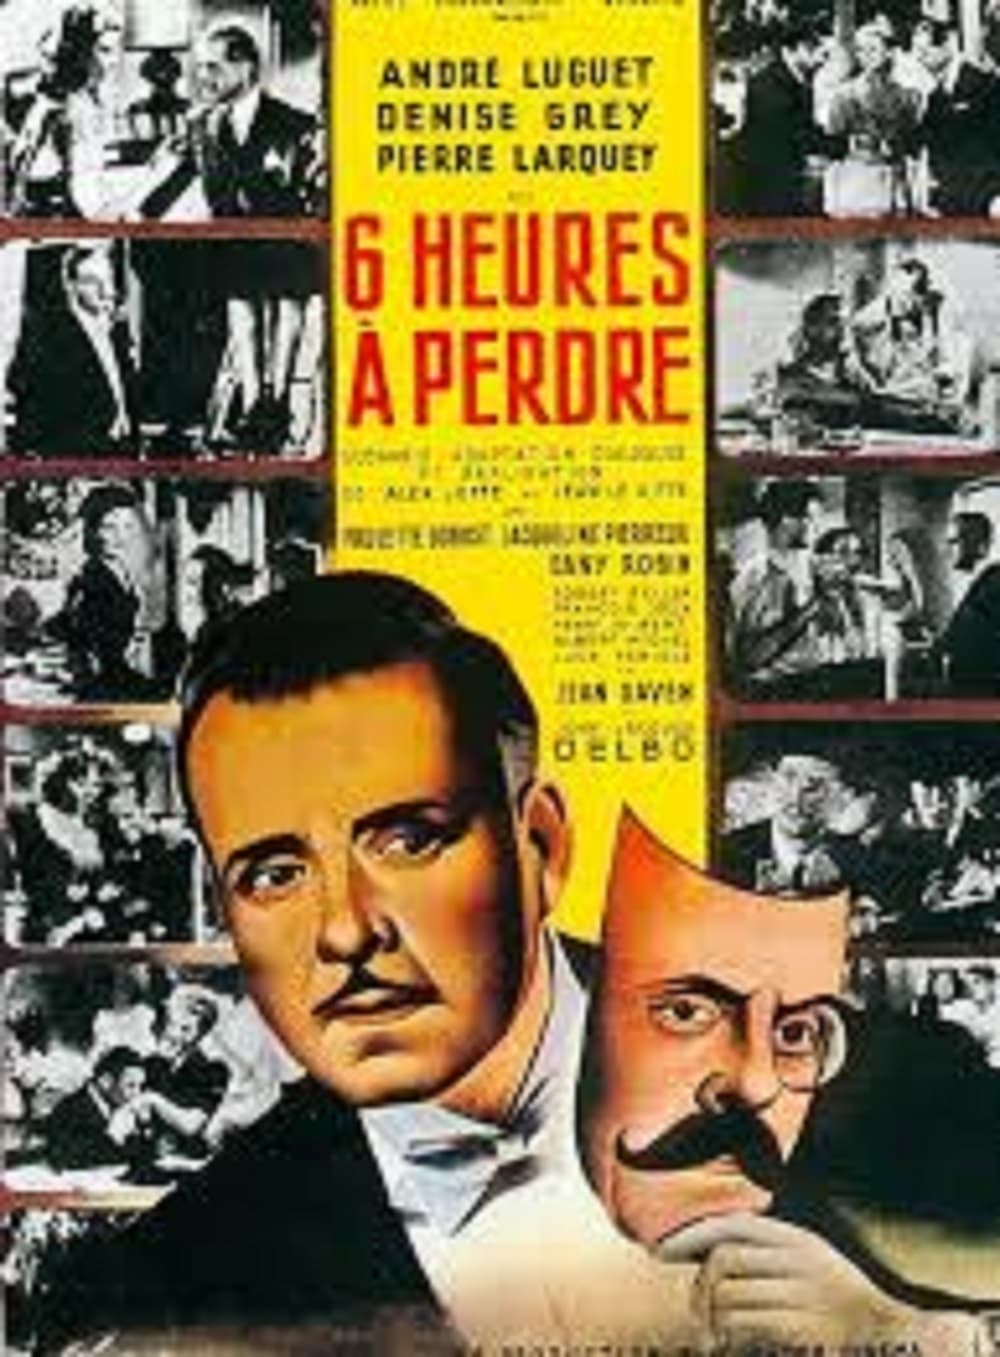 Six Hours to Lose (1947)